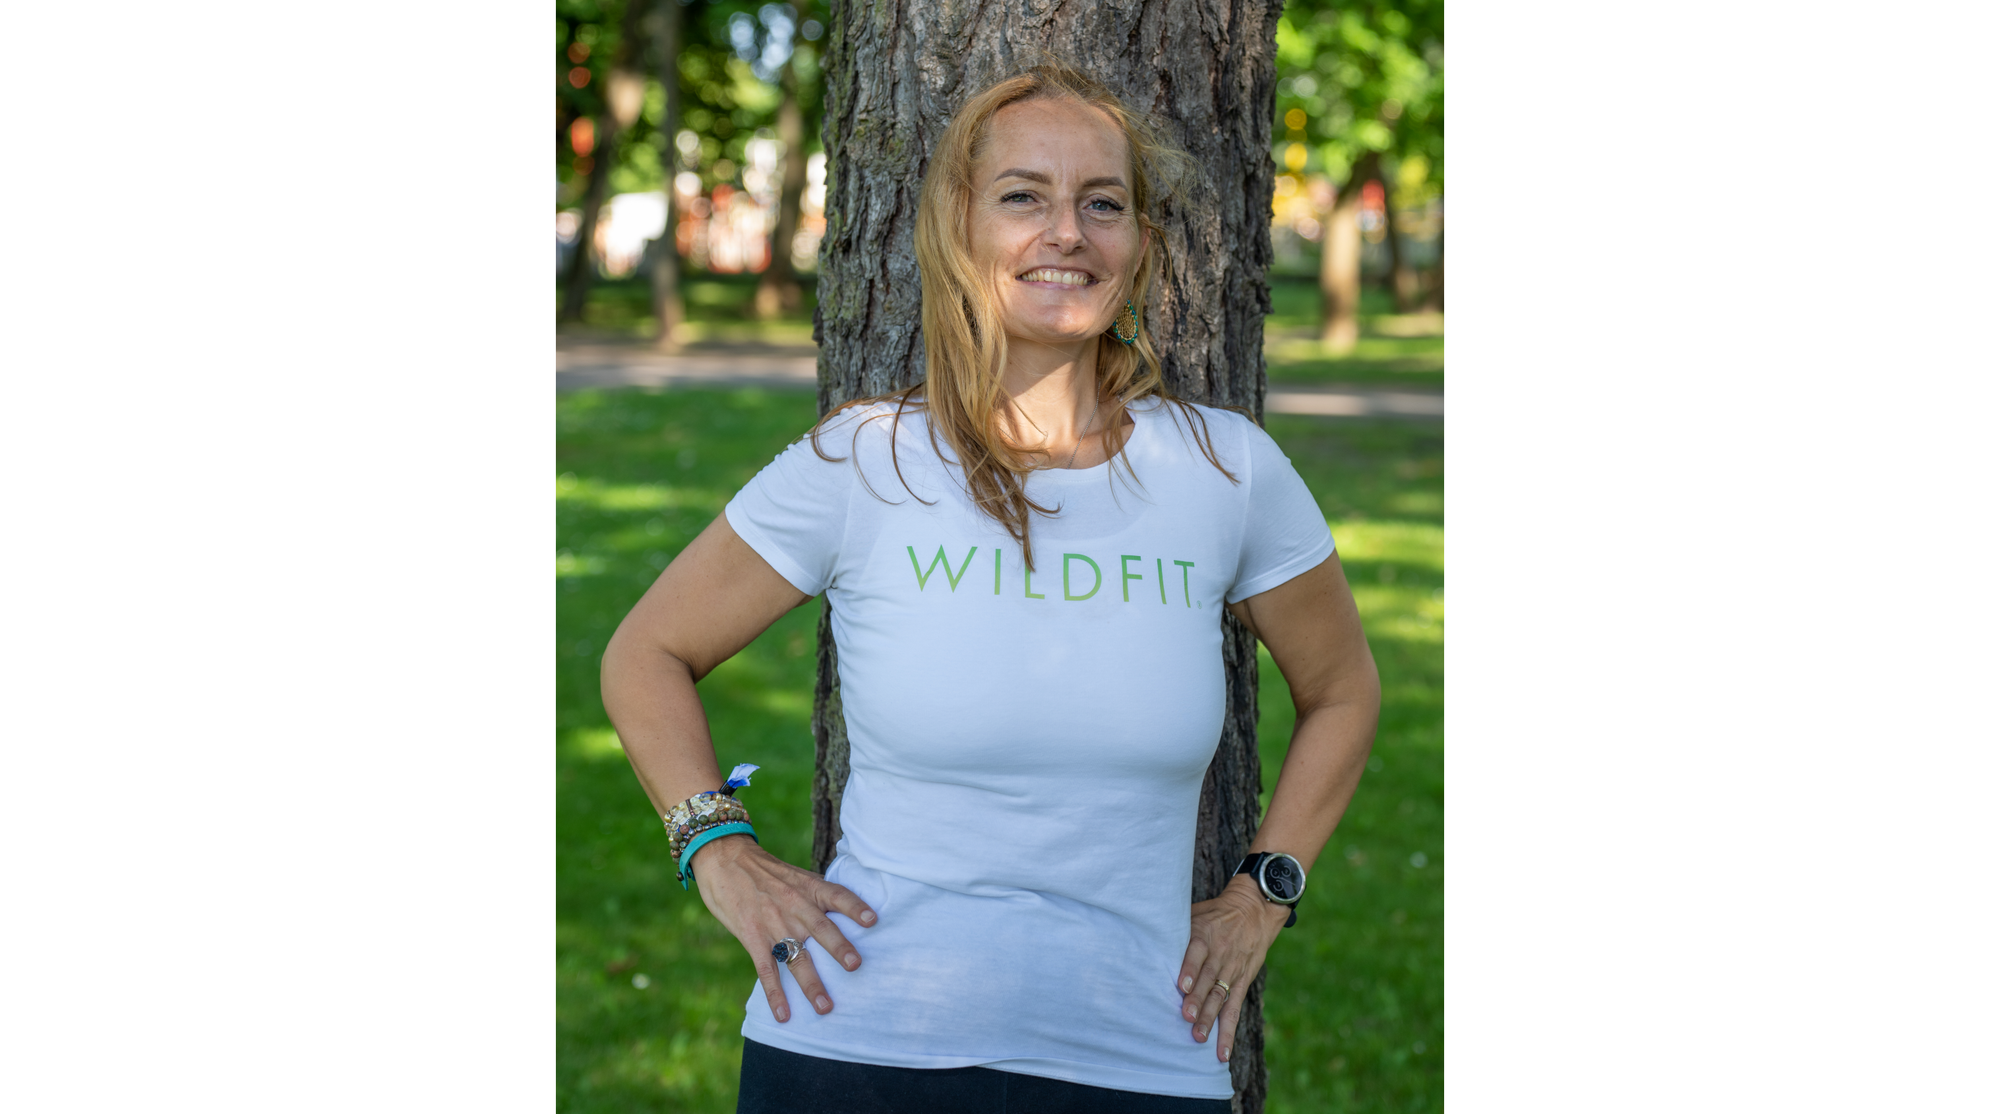 Intuitive • WILDFIT • Wellness Coach - Infinite Activation